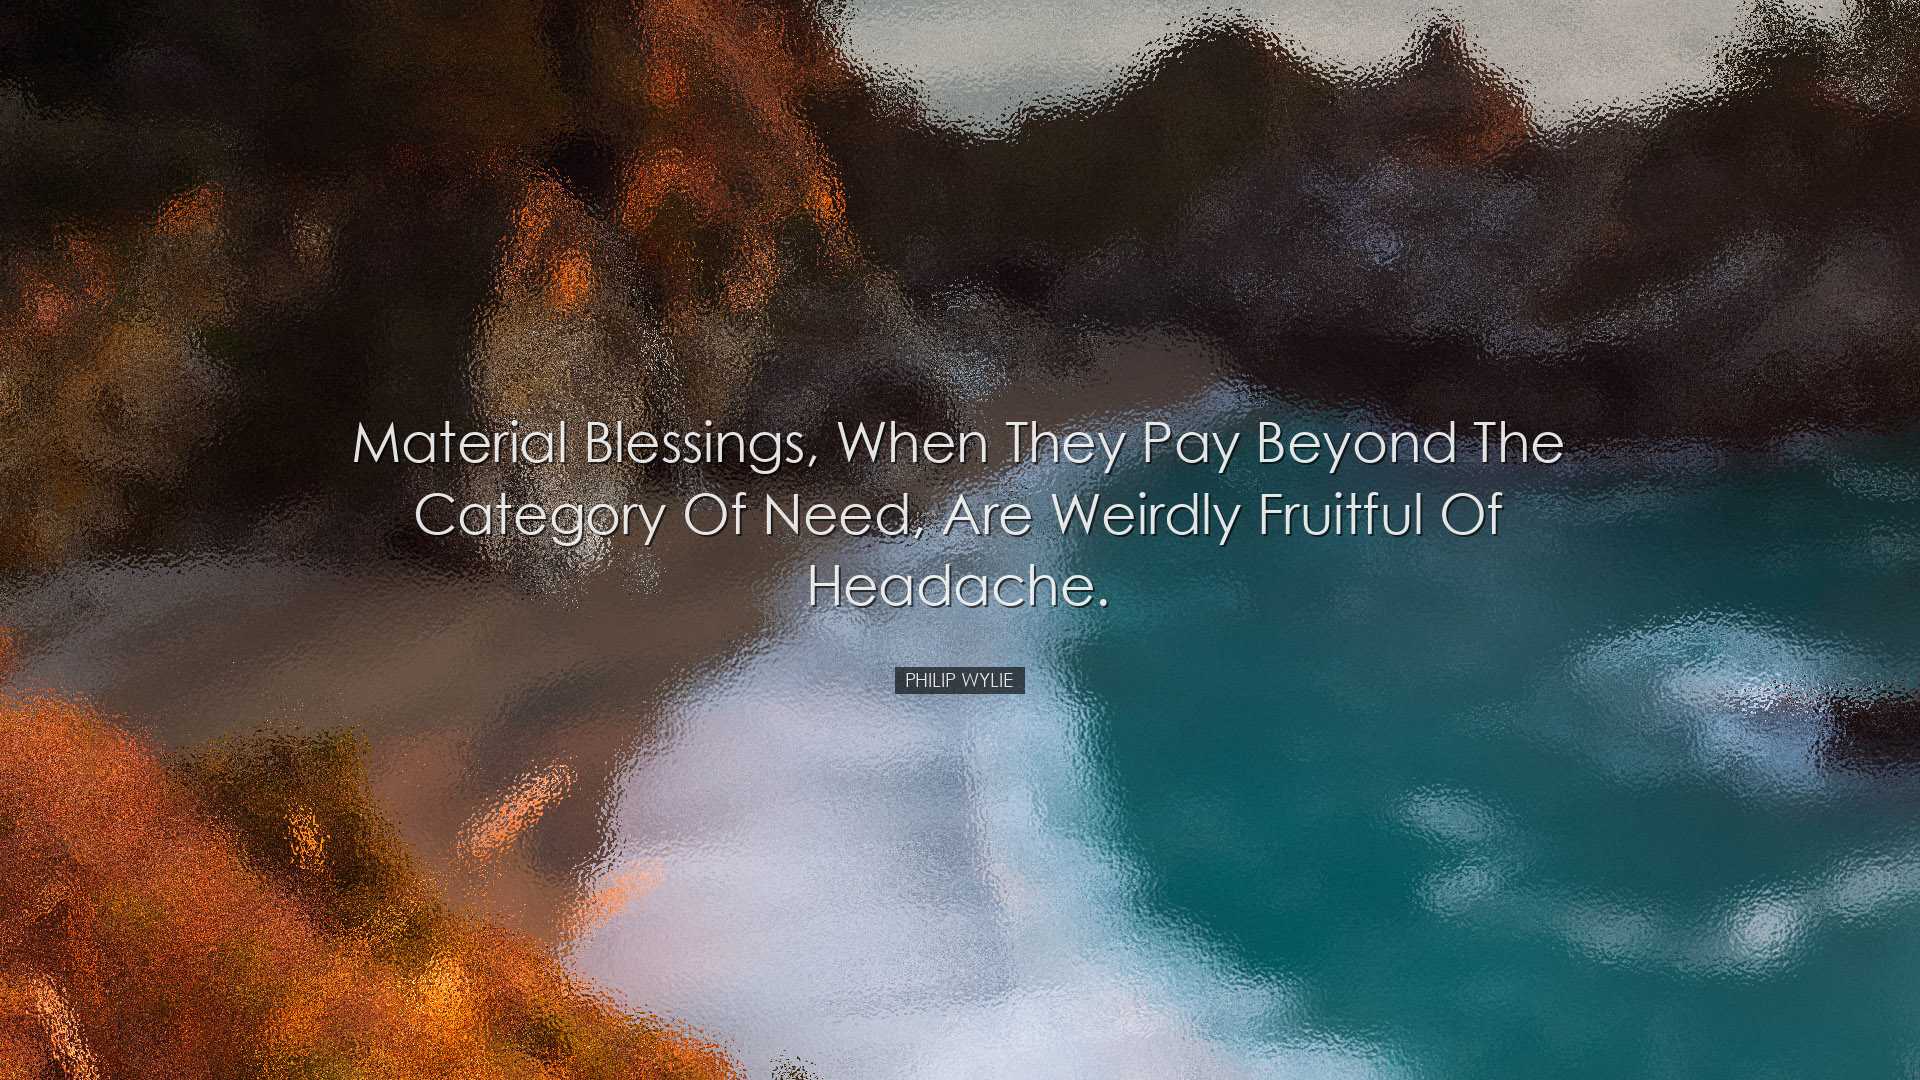 Material blessings, when they pay beyond the category of need, are